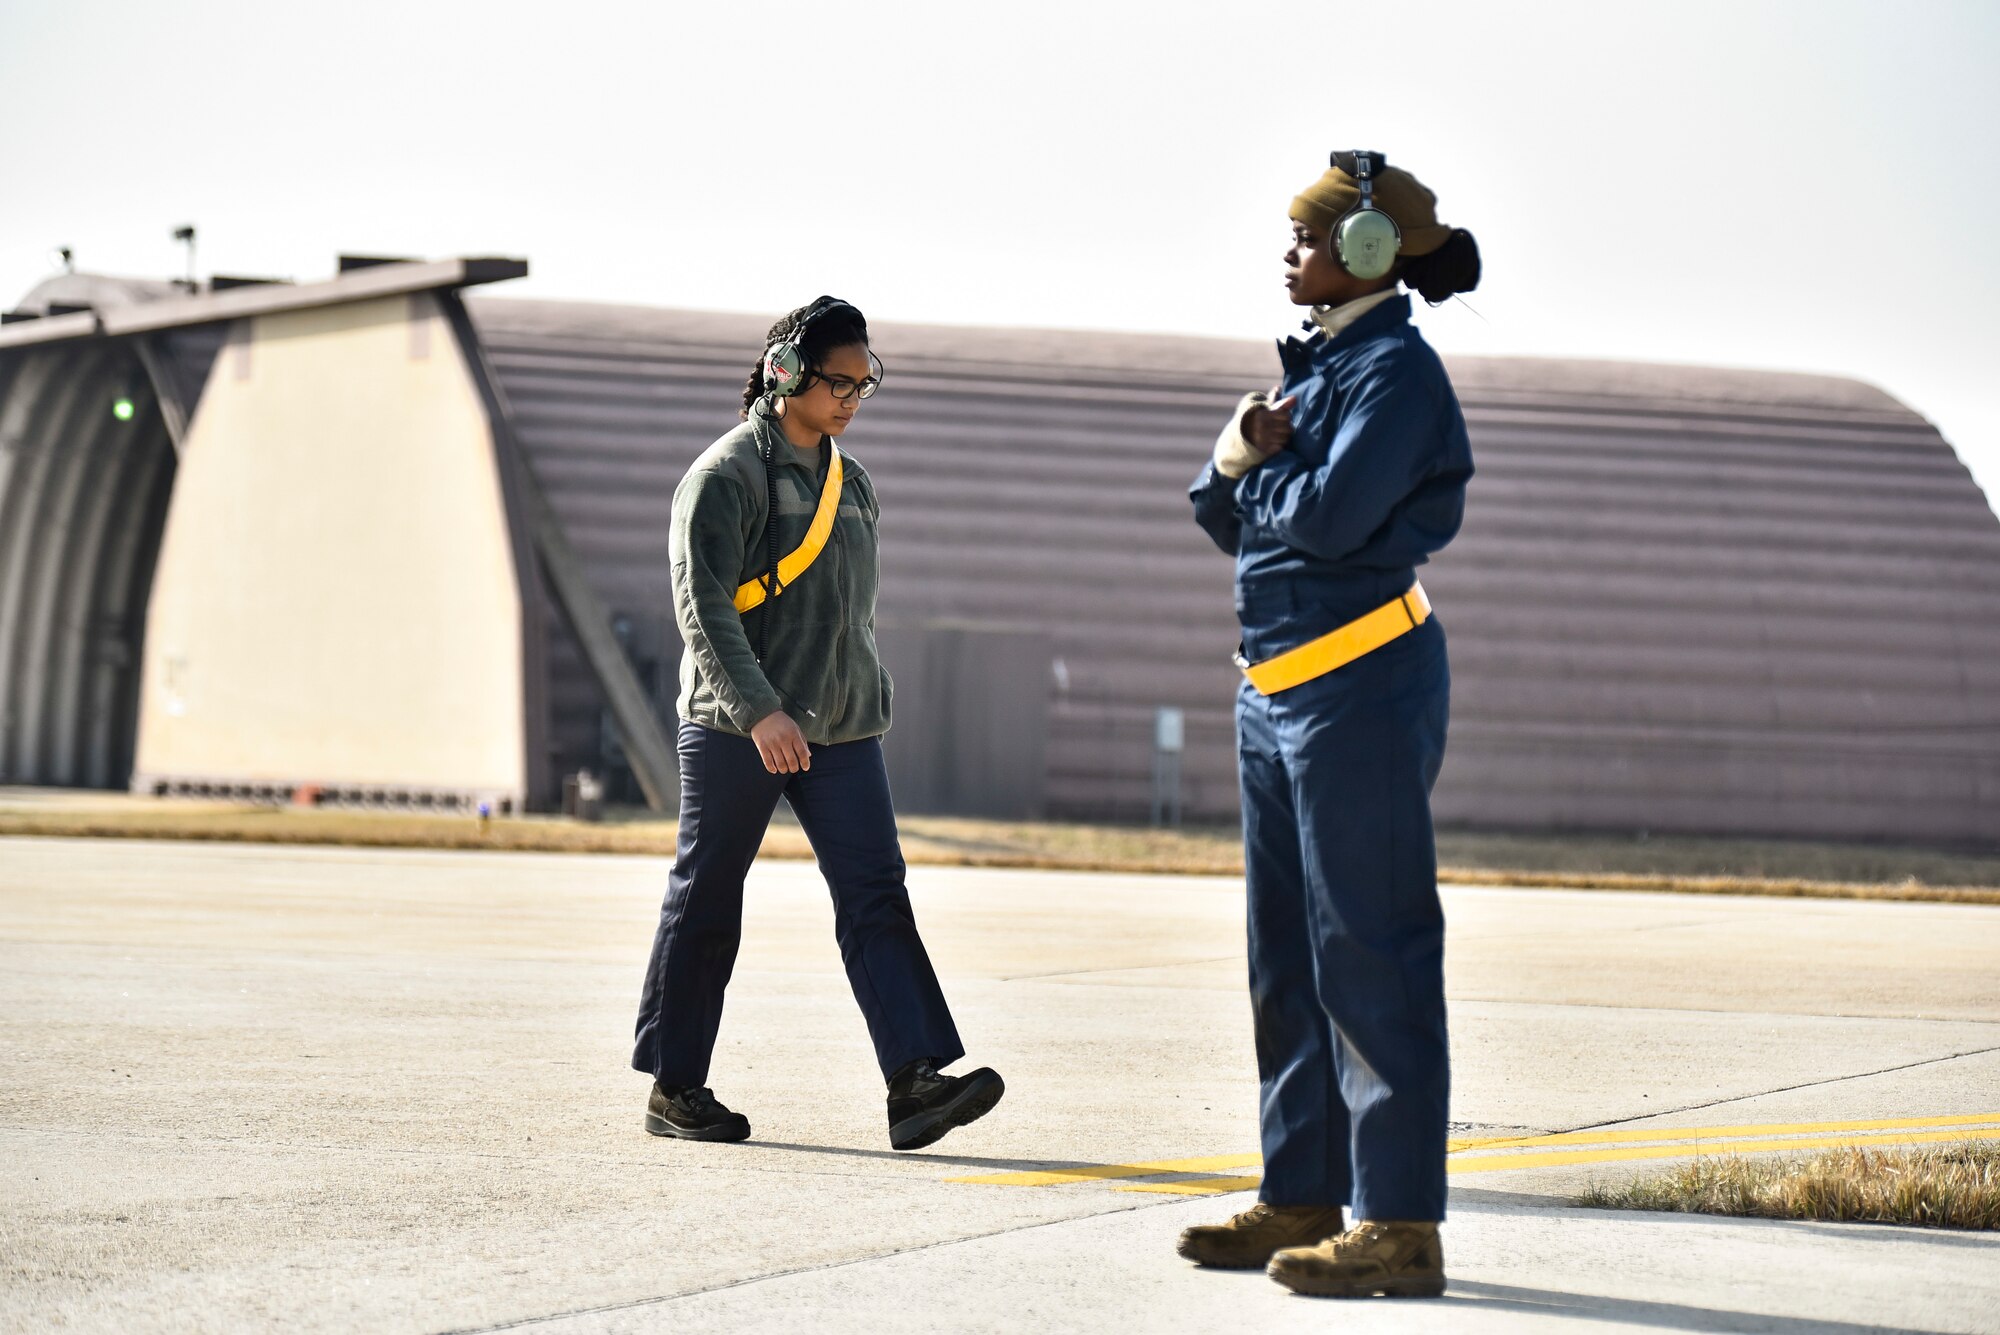 Crew chiefs wait for an F-16 to takeoff.